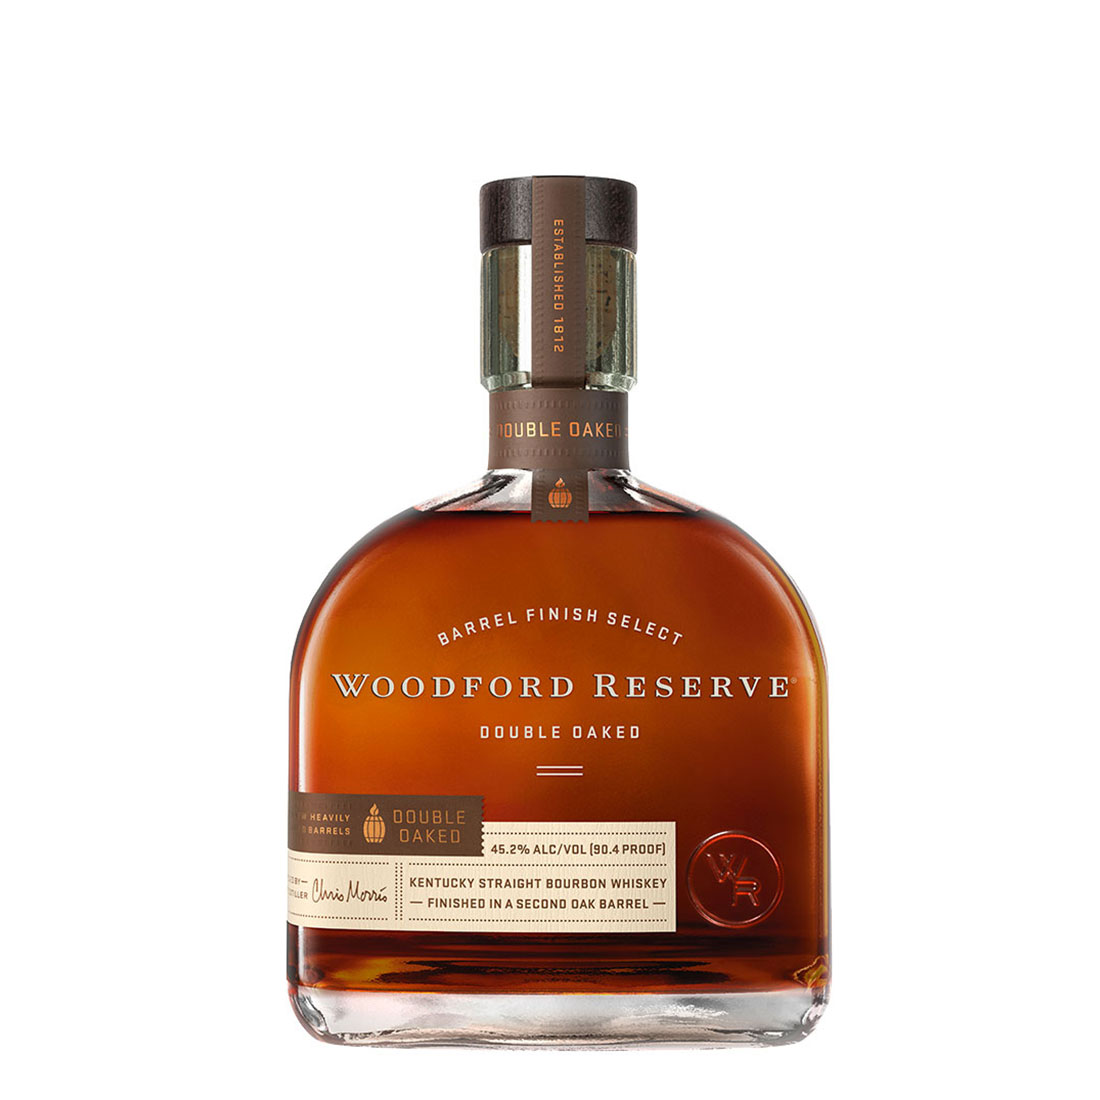 LB_Bottle-Woodford-Reserve-Double-Oaked